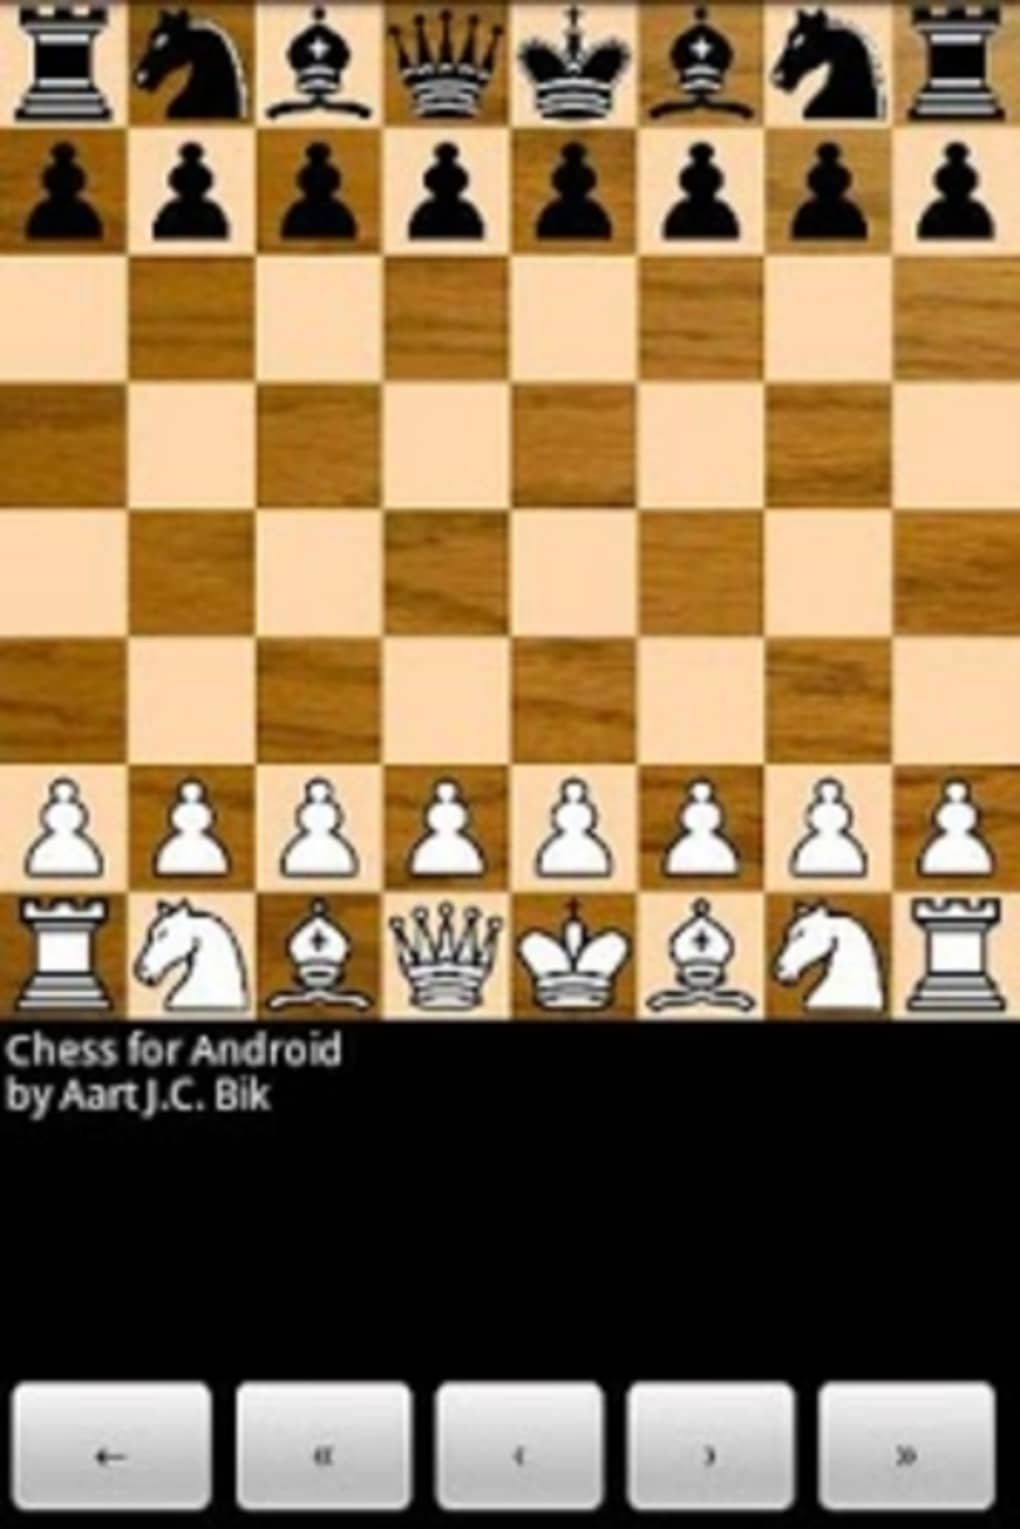 Best chess game for mac